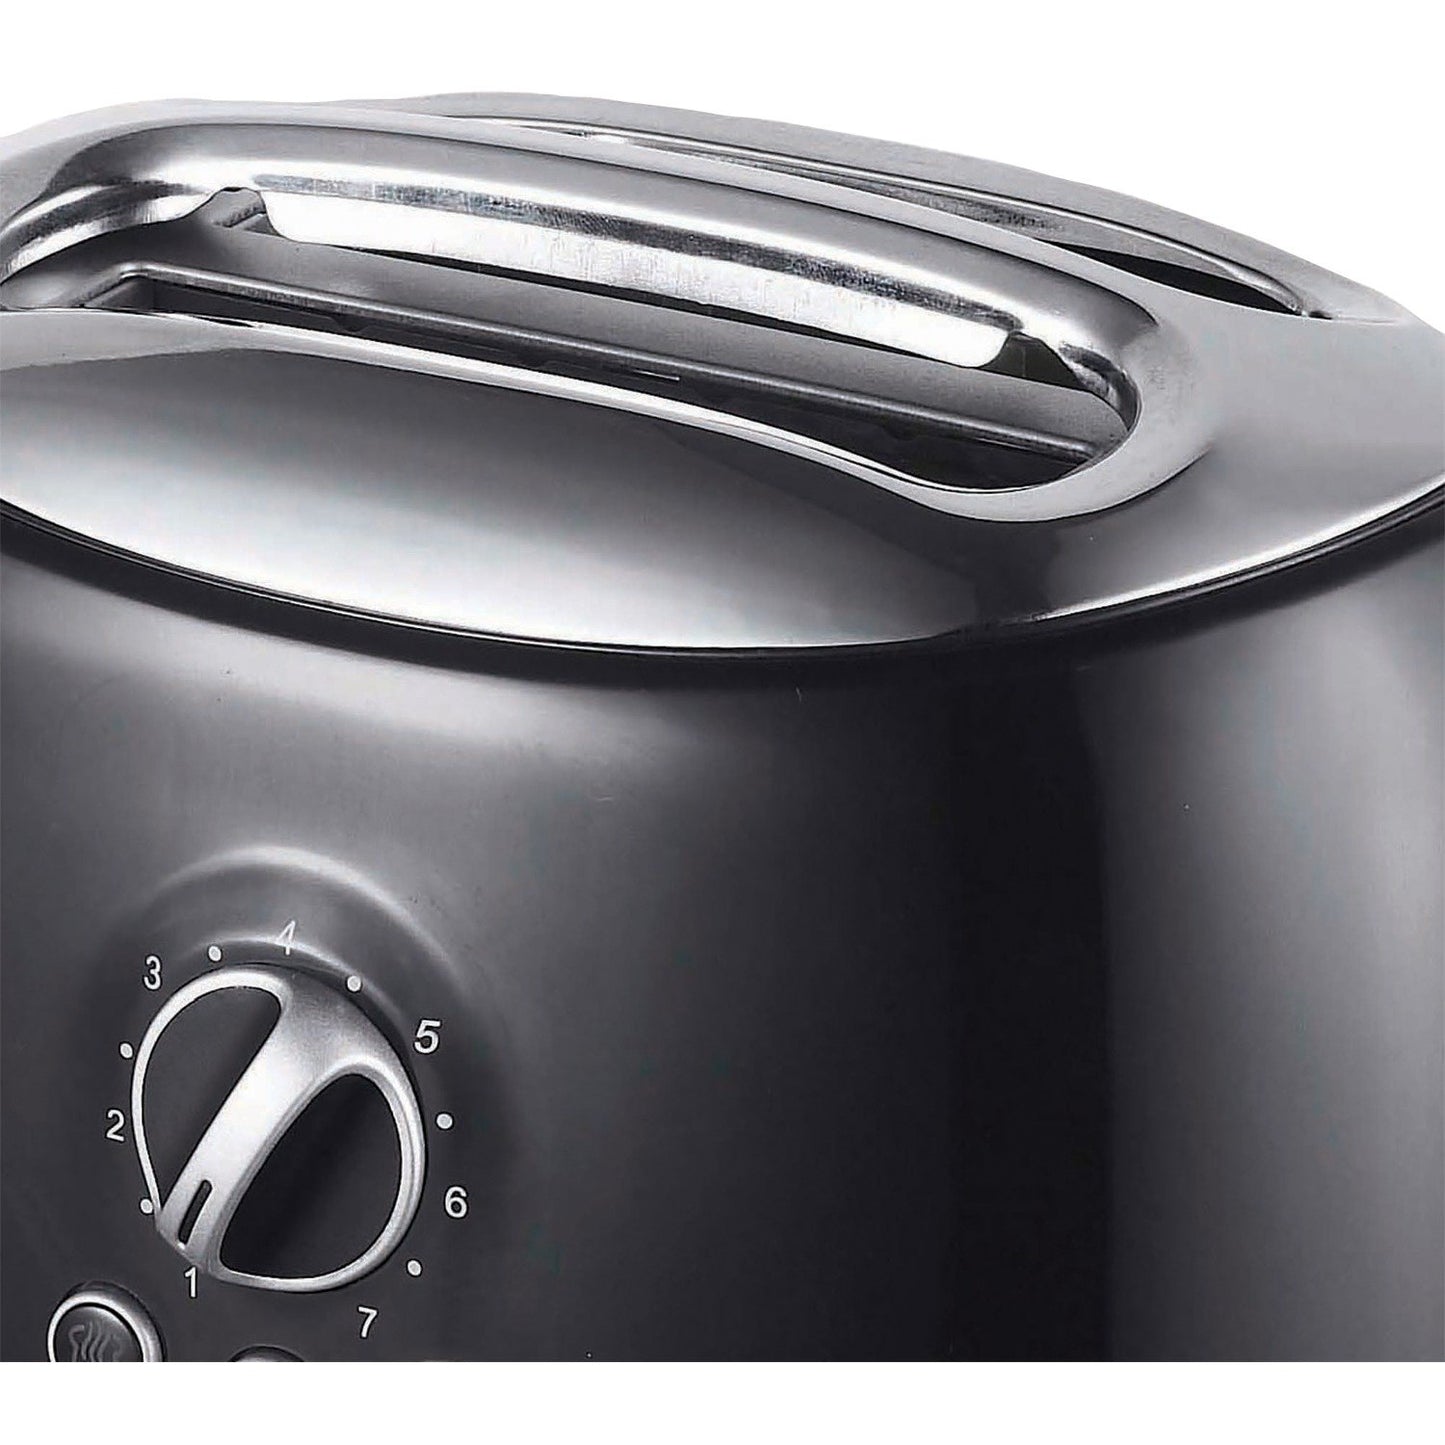 Brentwood Appl. TS-270BK Cool-Touch 2-Slice Retro Toaster w/Extra-Wide Slots